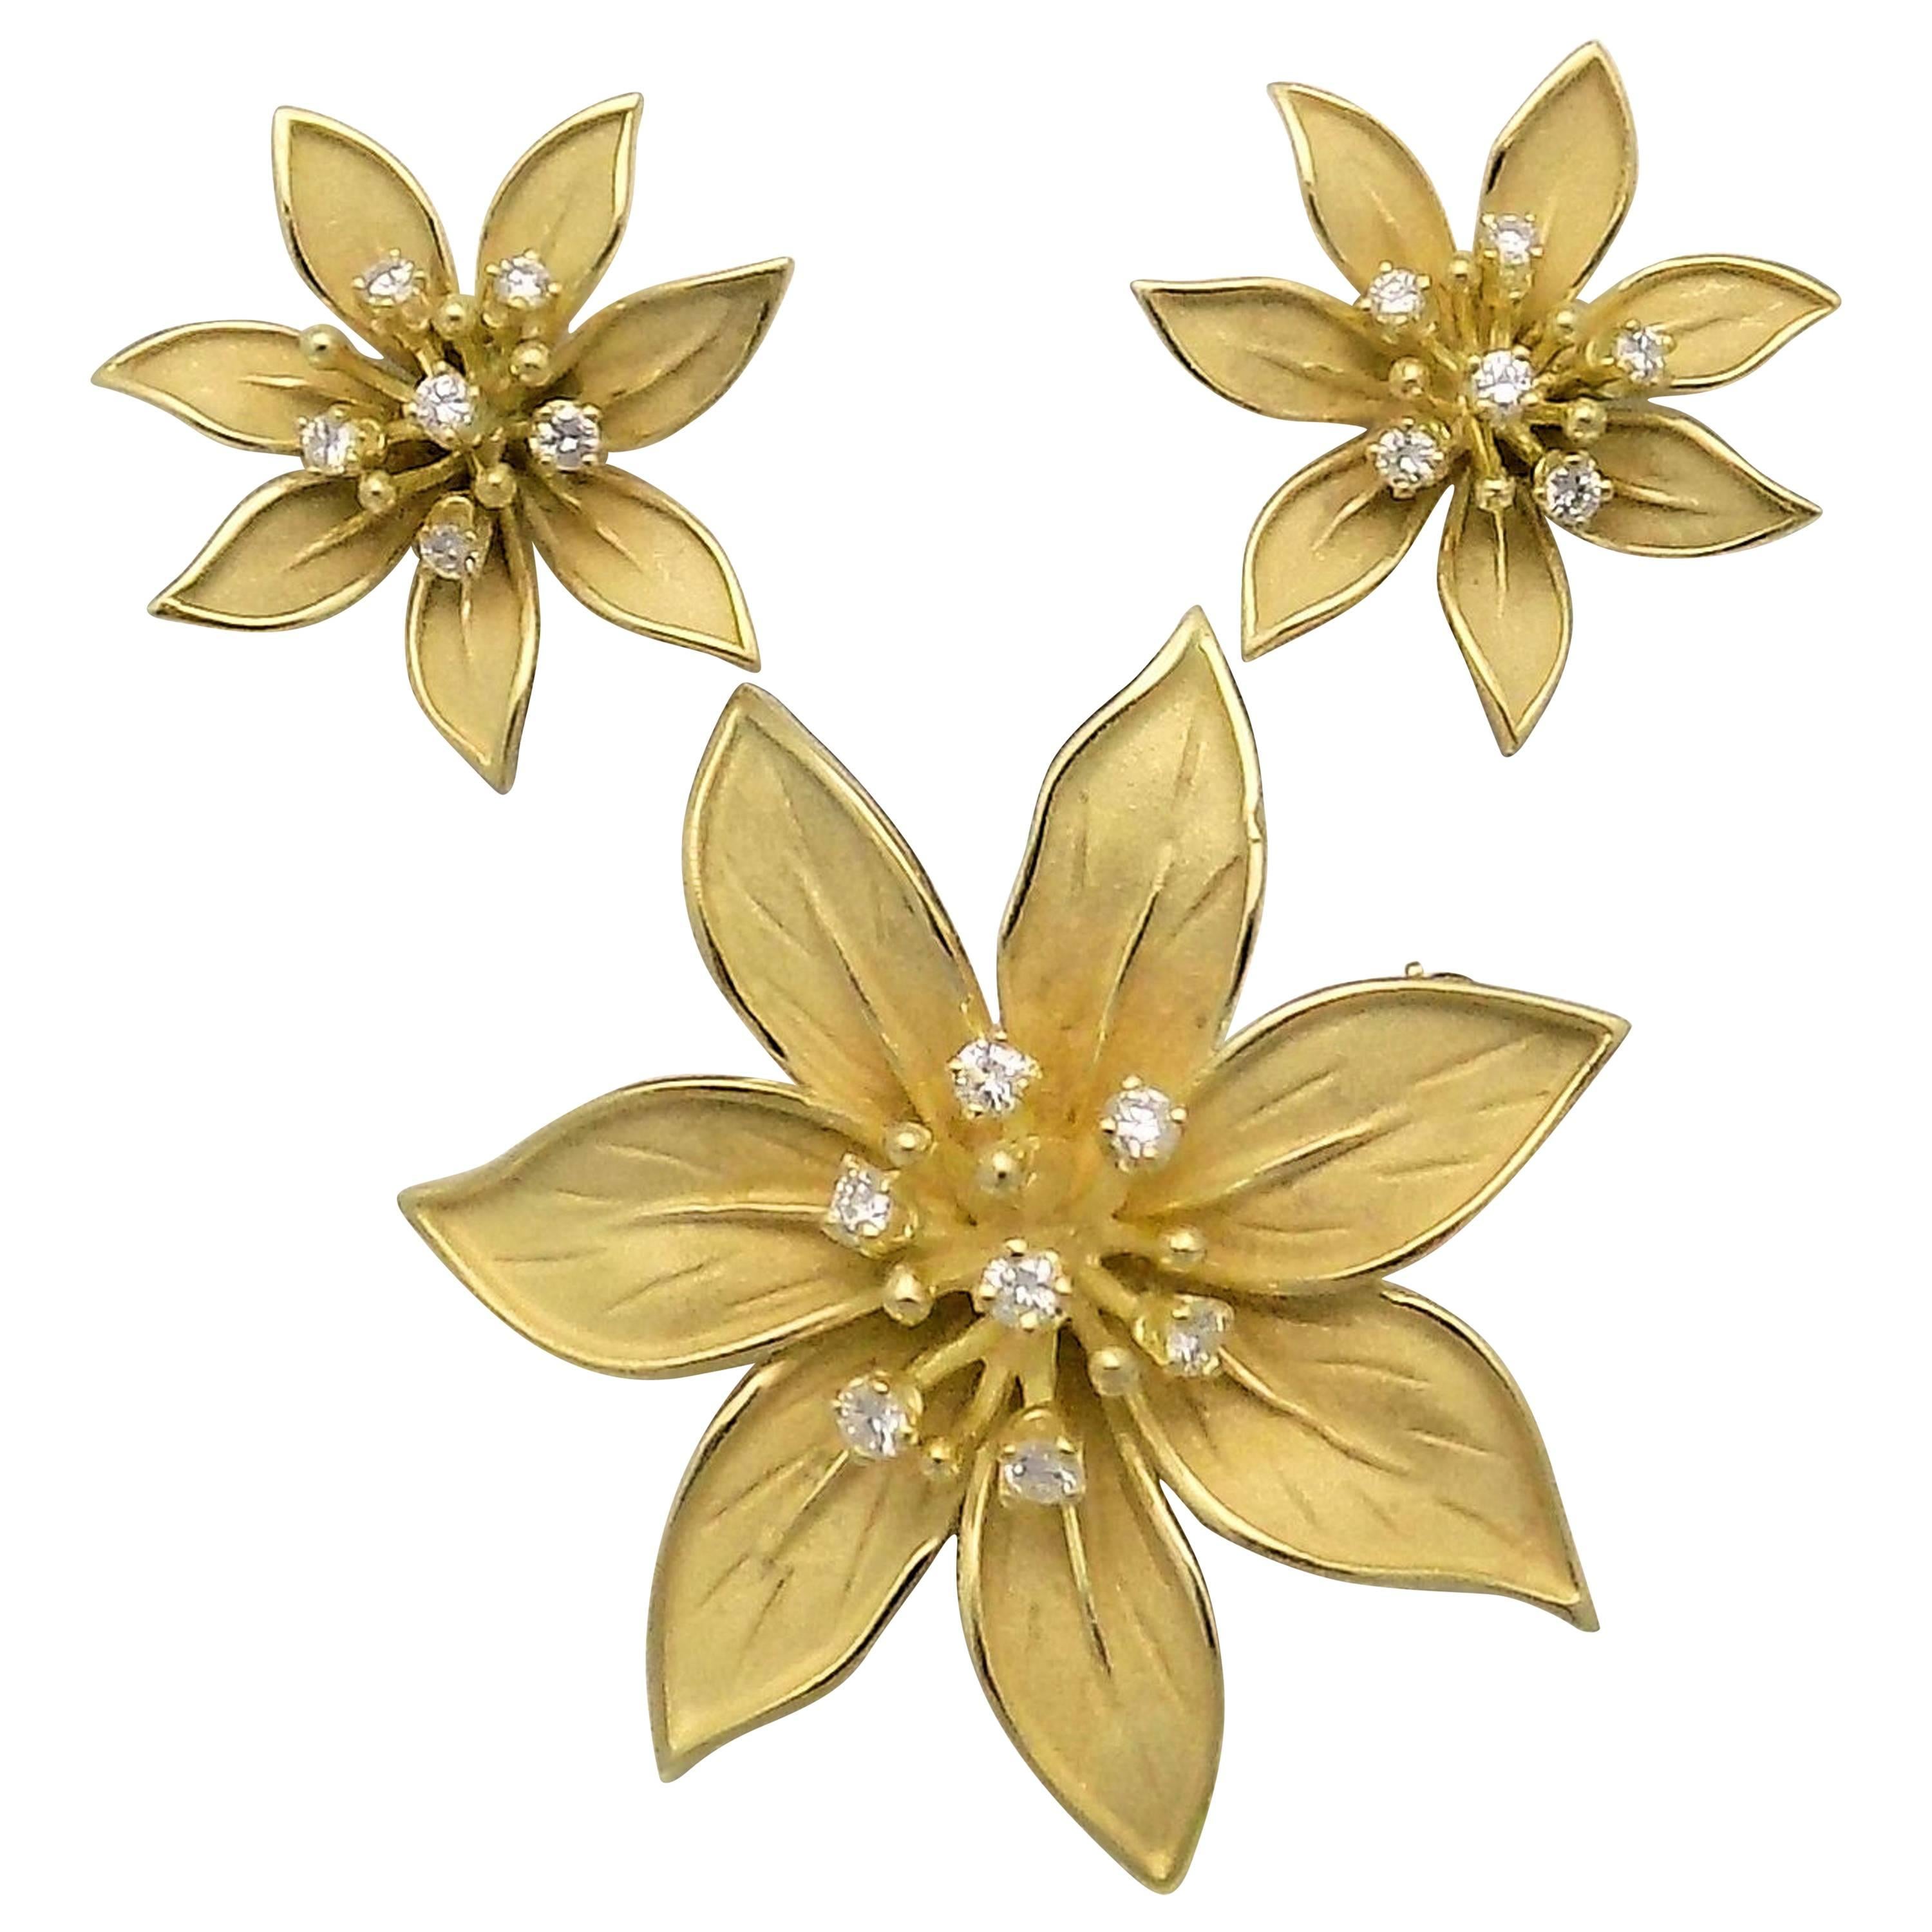 Flower Brooch and Earring Set in 18 Karat Yellow Gold and Diamonds